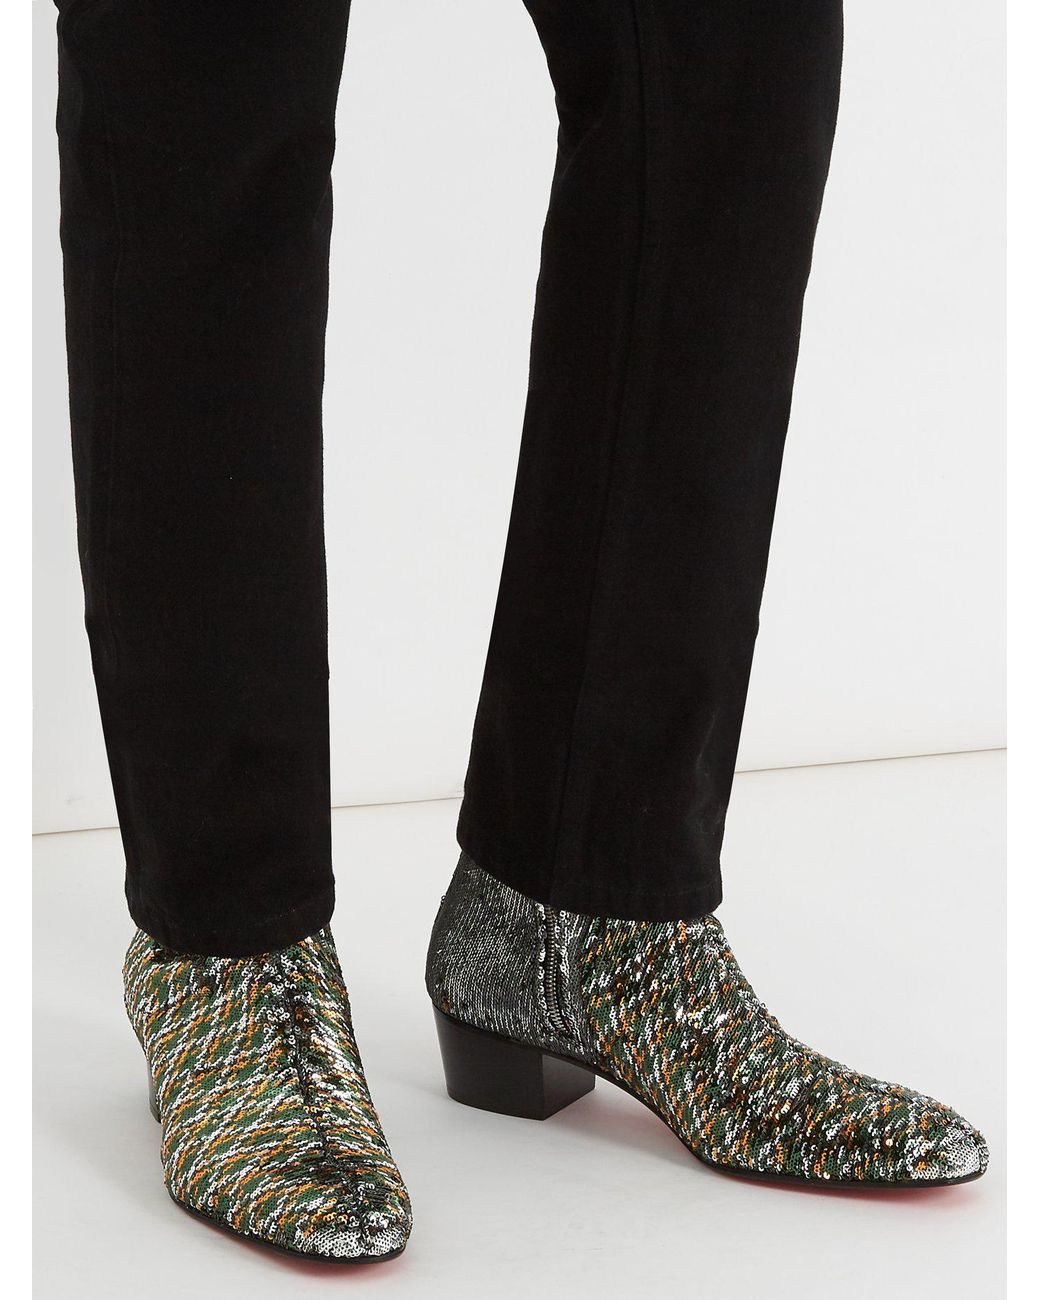 Christian Louboutin Huston Sequin Embellished Ankle Boots for Men | Lyst